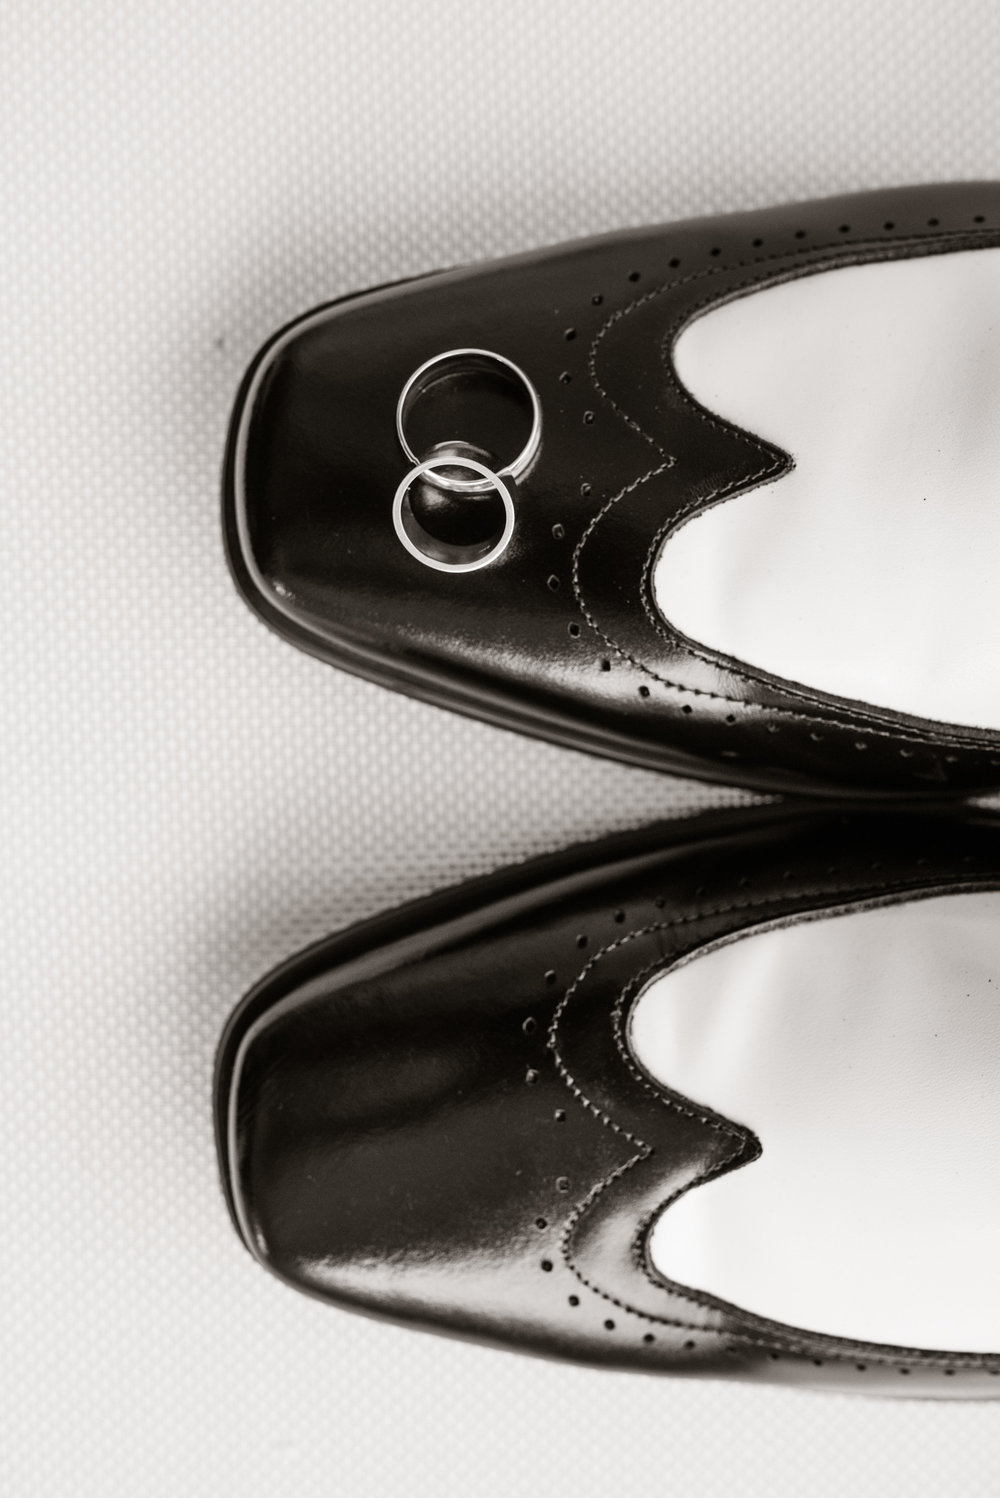 Black and White Oxfords for the Groom